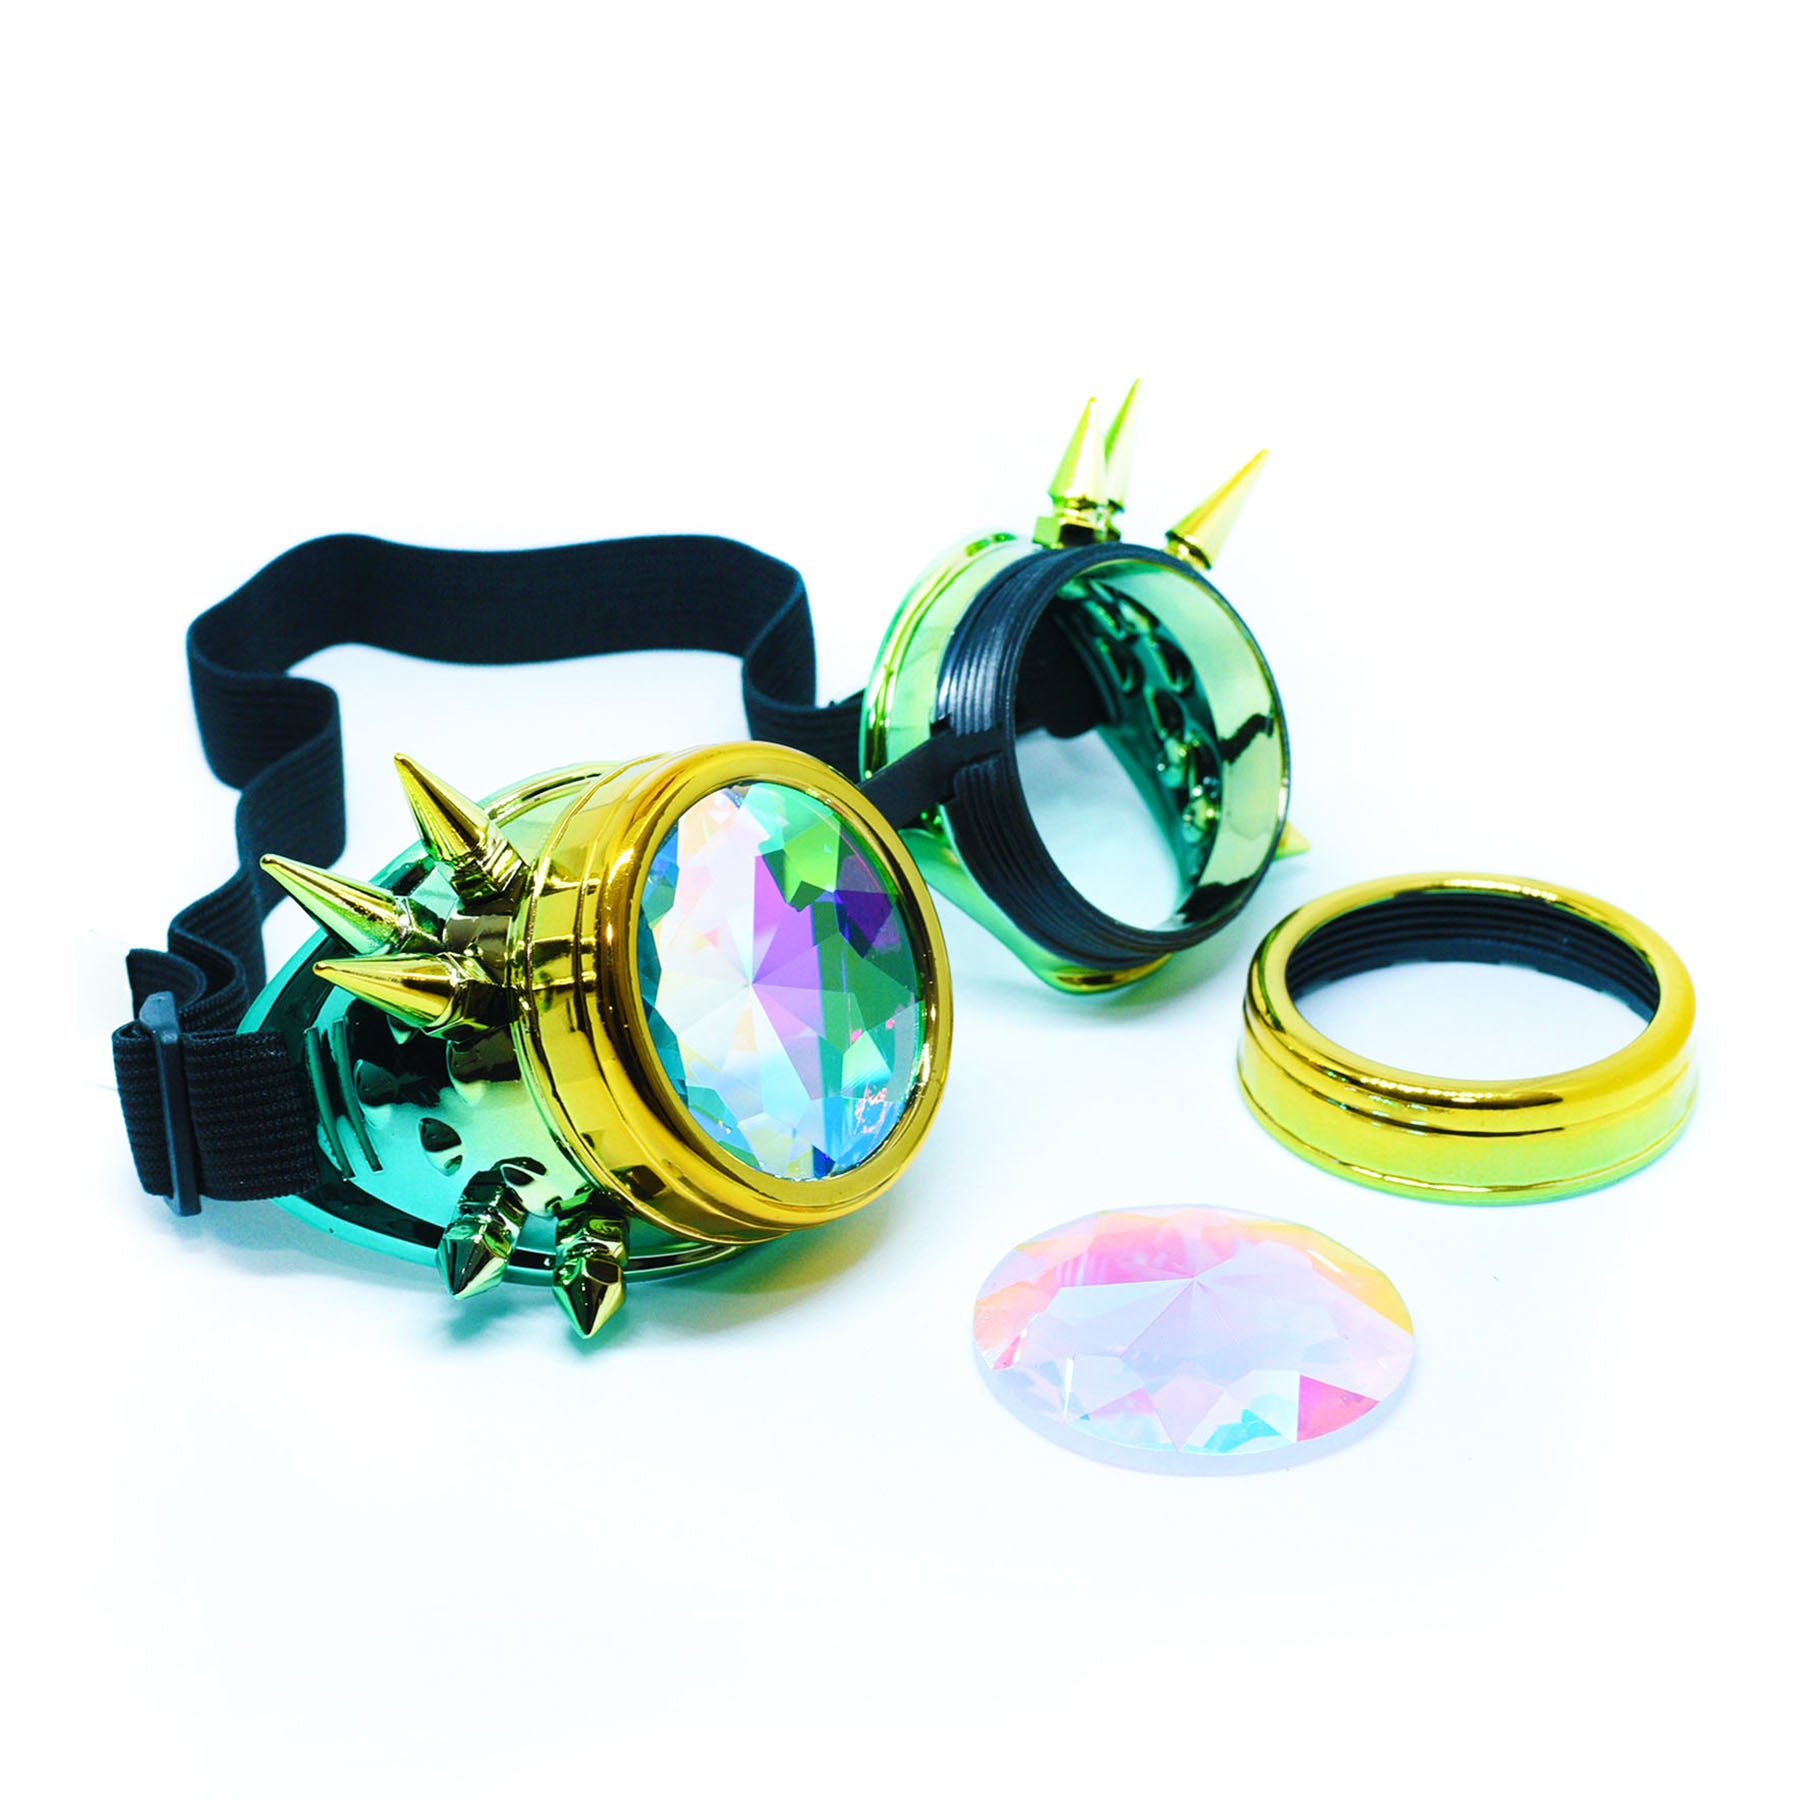 Yellow Green Steampunk Goggles Kaleidoscope Glasses - Trippy Psychedelic Rave Goggles - Funky Prism Glasses For Raves - Festival Accessories